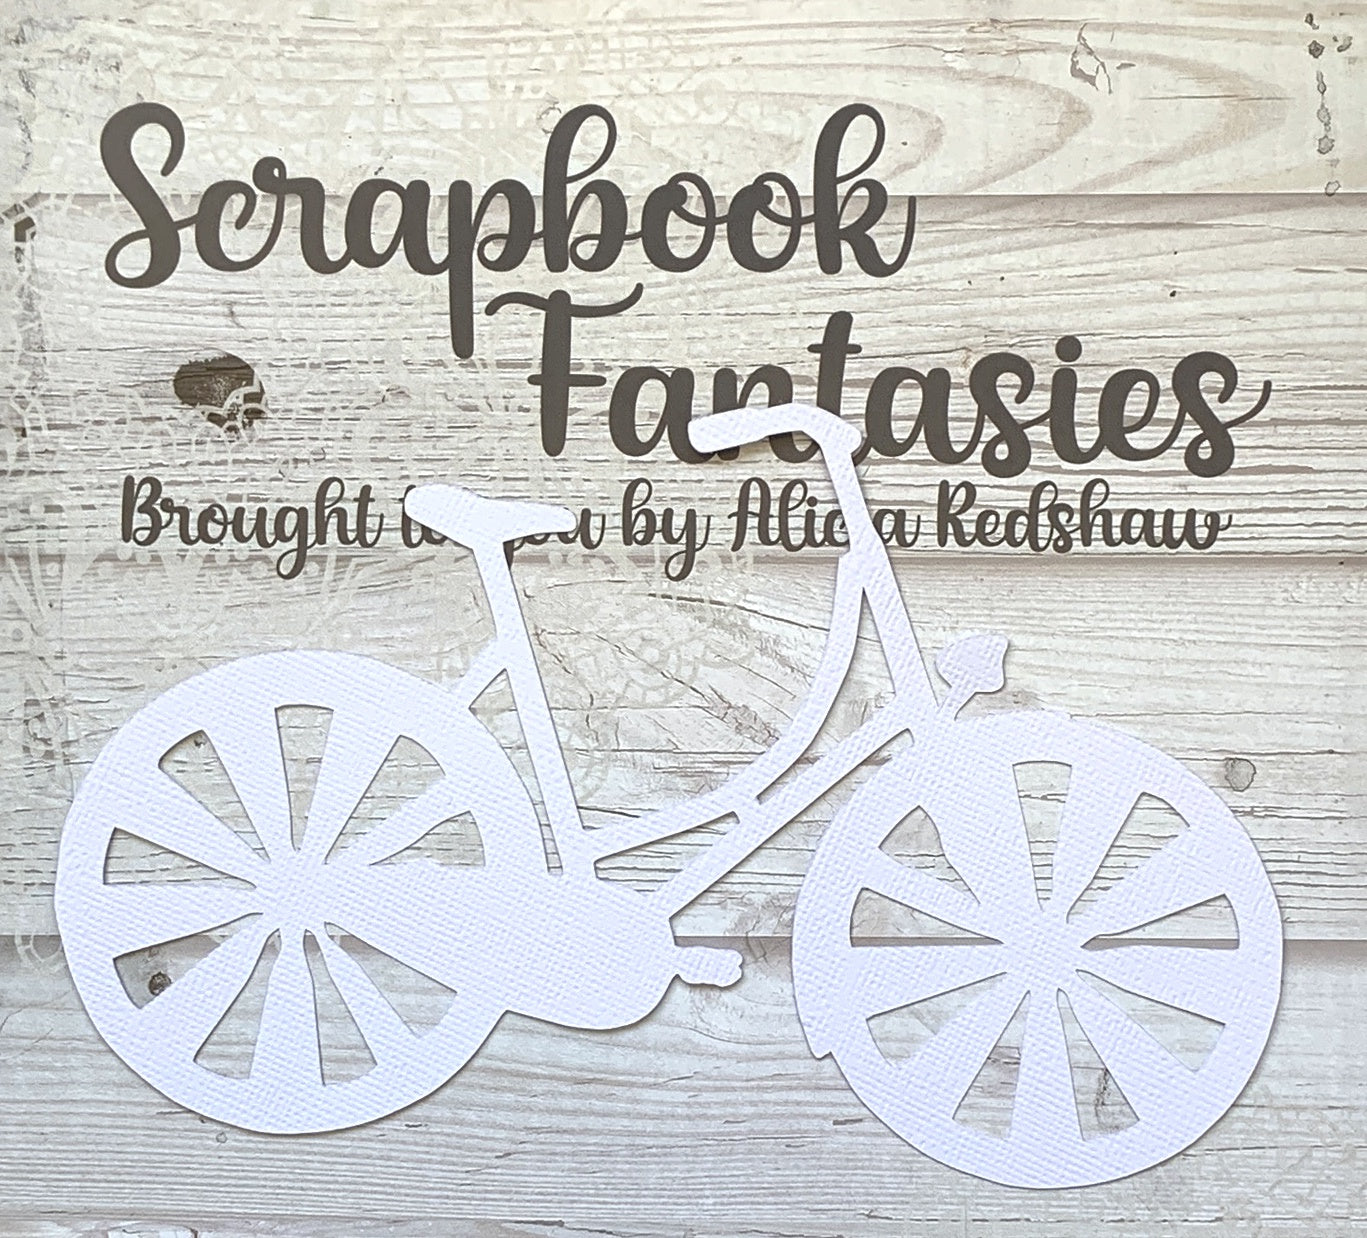 Bicycle 7.25"x4.75" White Linen Cardstock Cutout - Designed by Alicia Redshaw